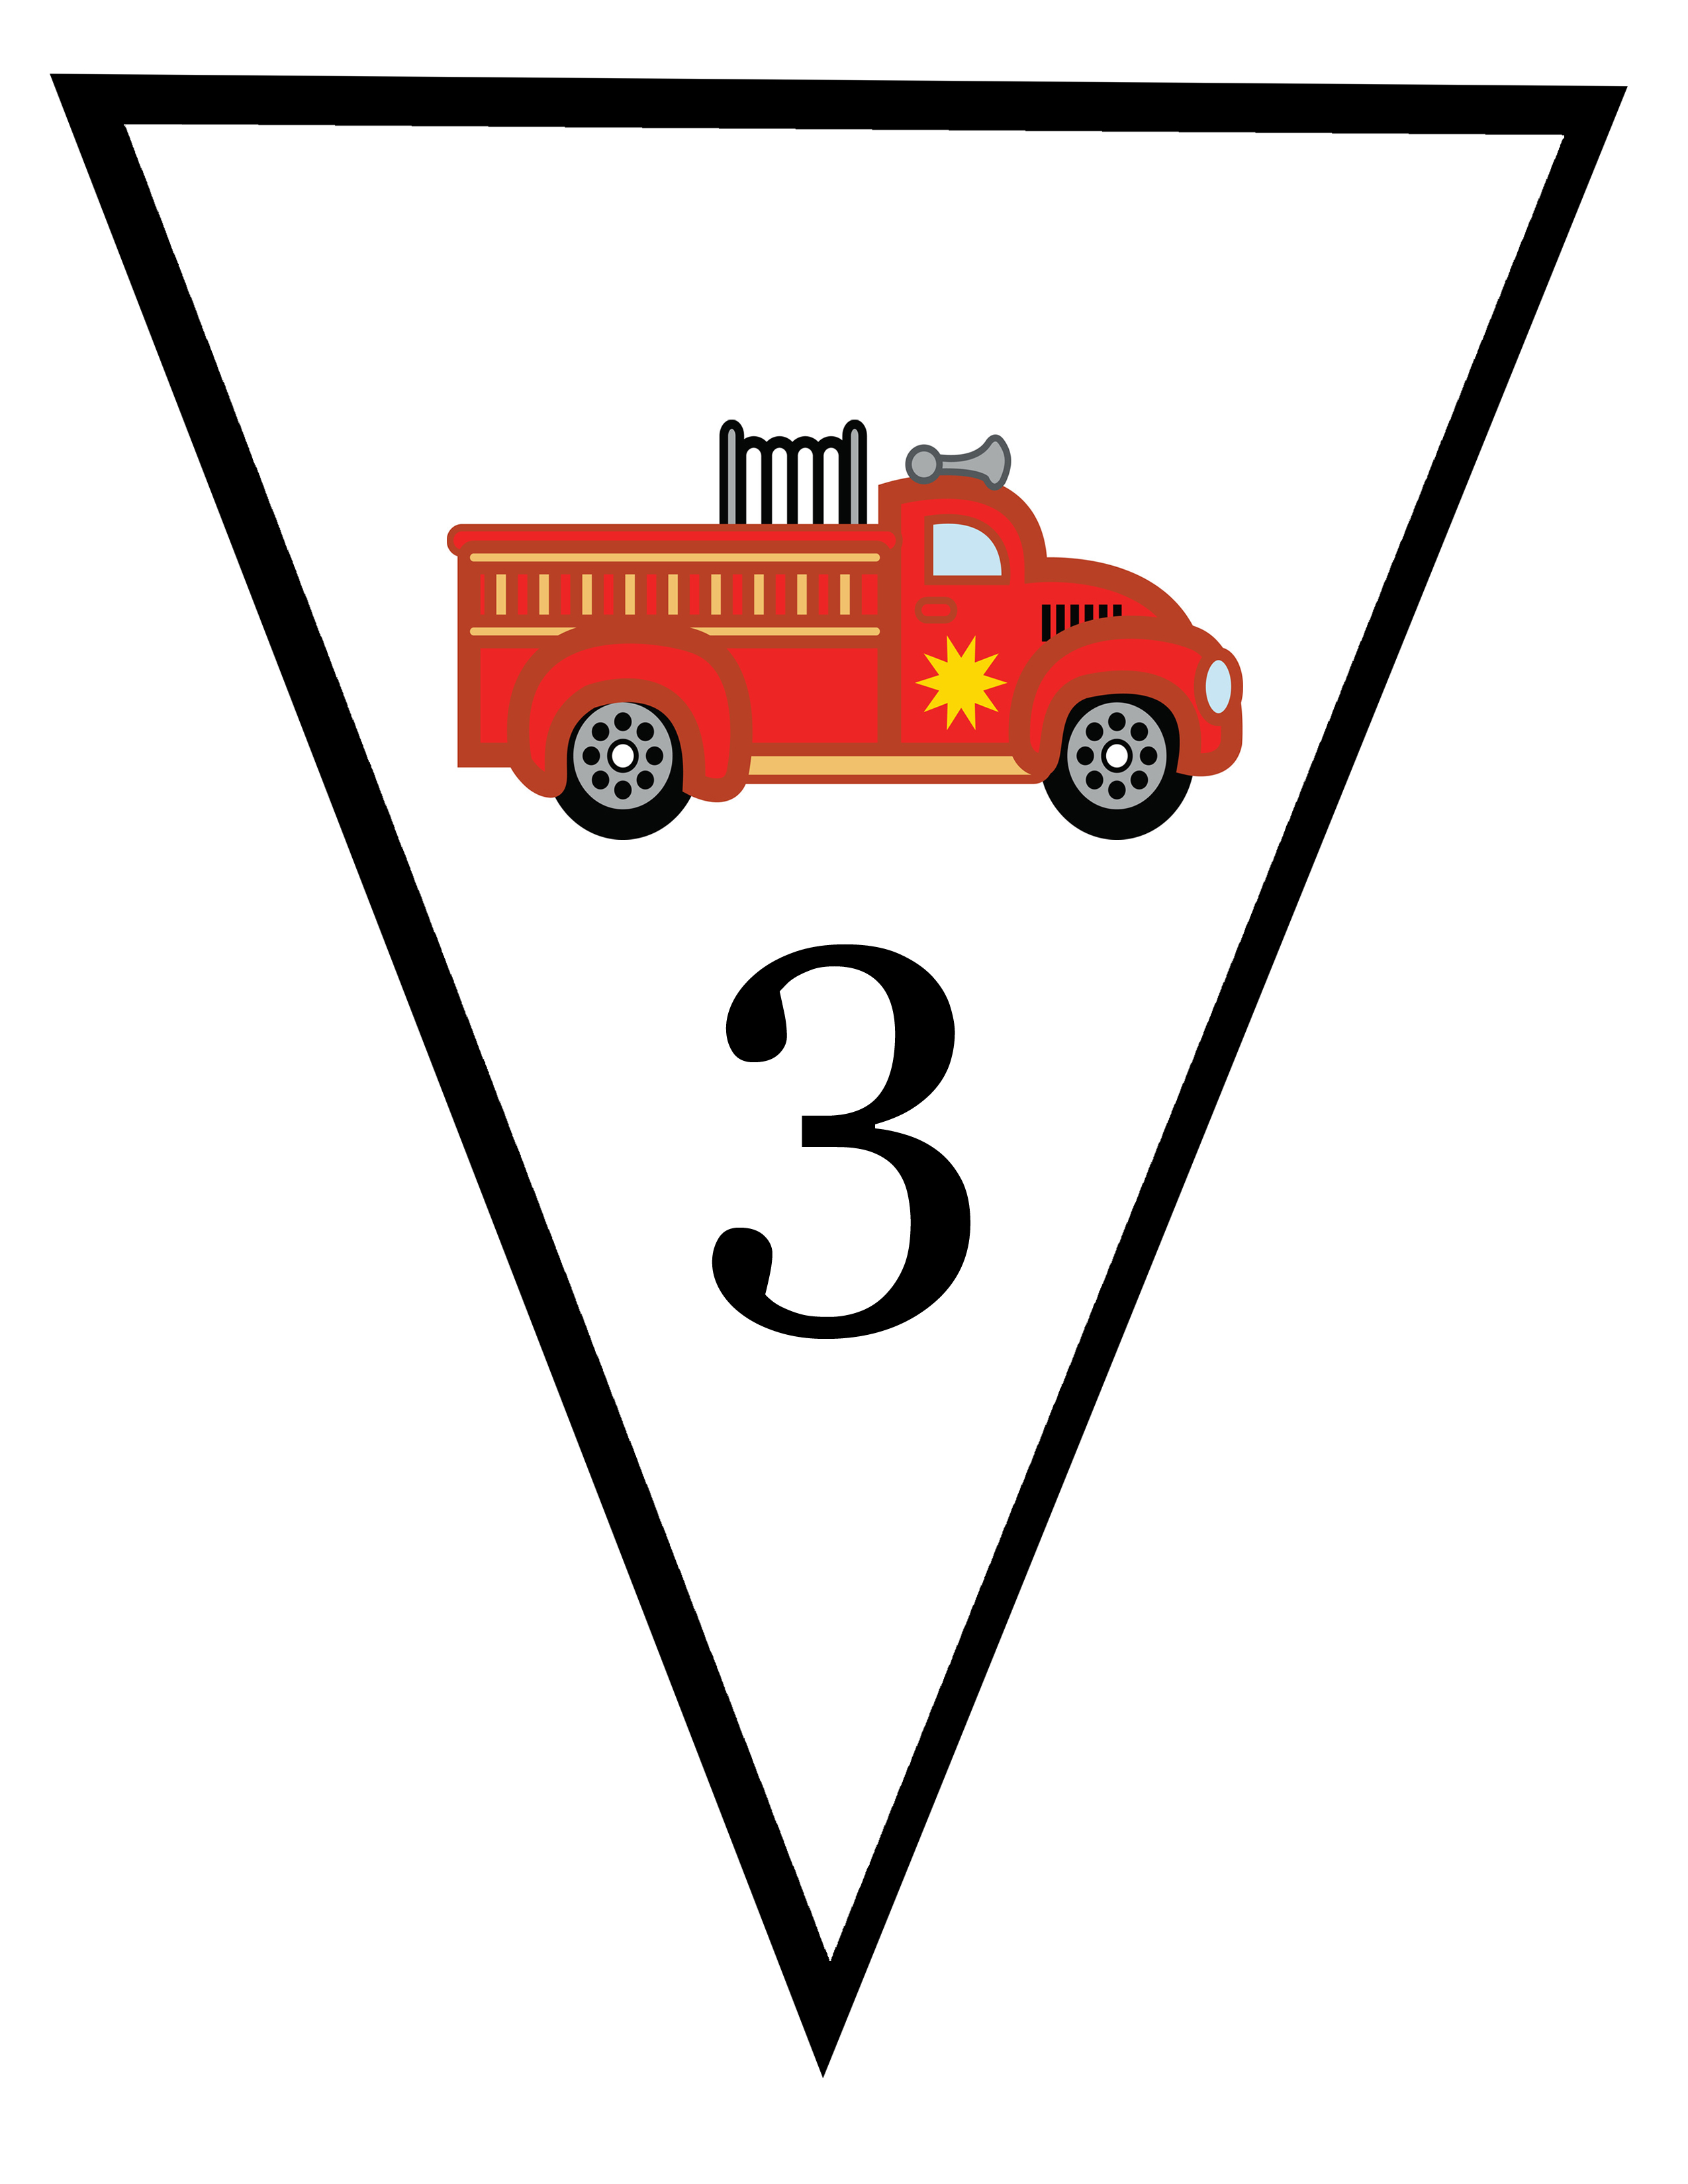 Clip art fire truck was free clipart images